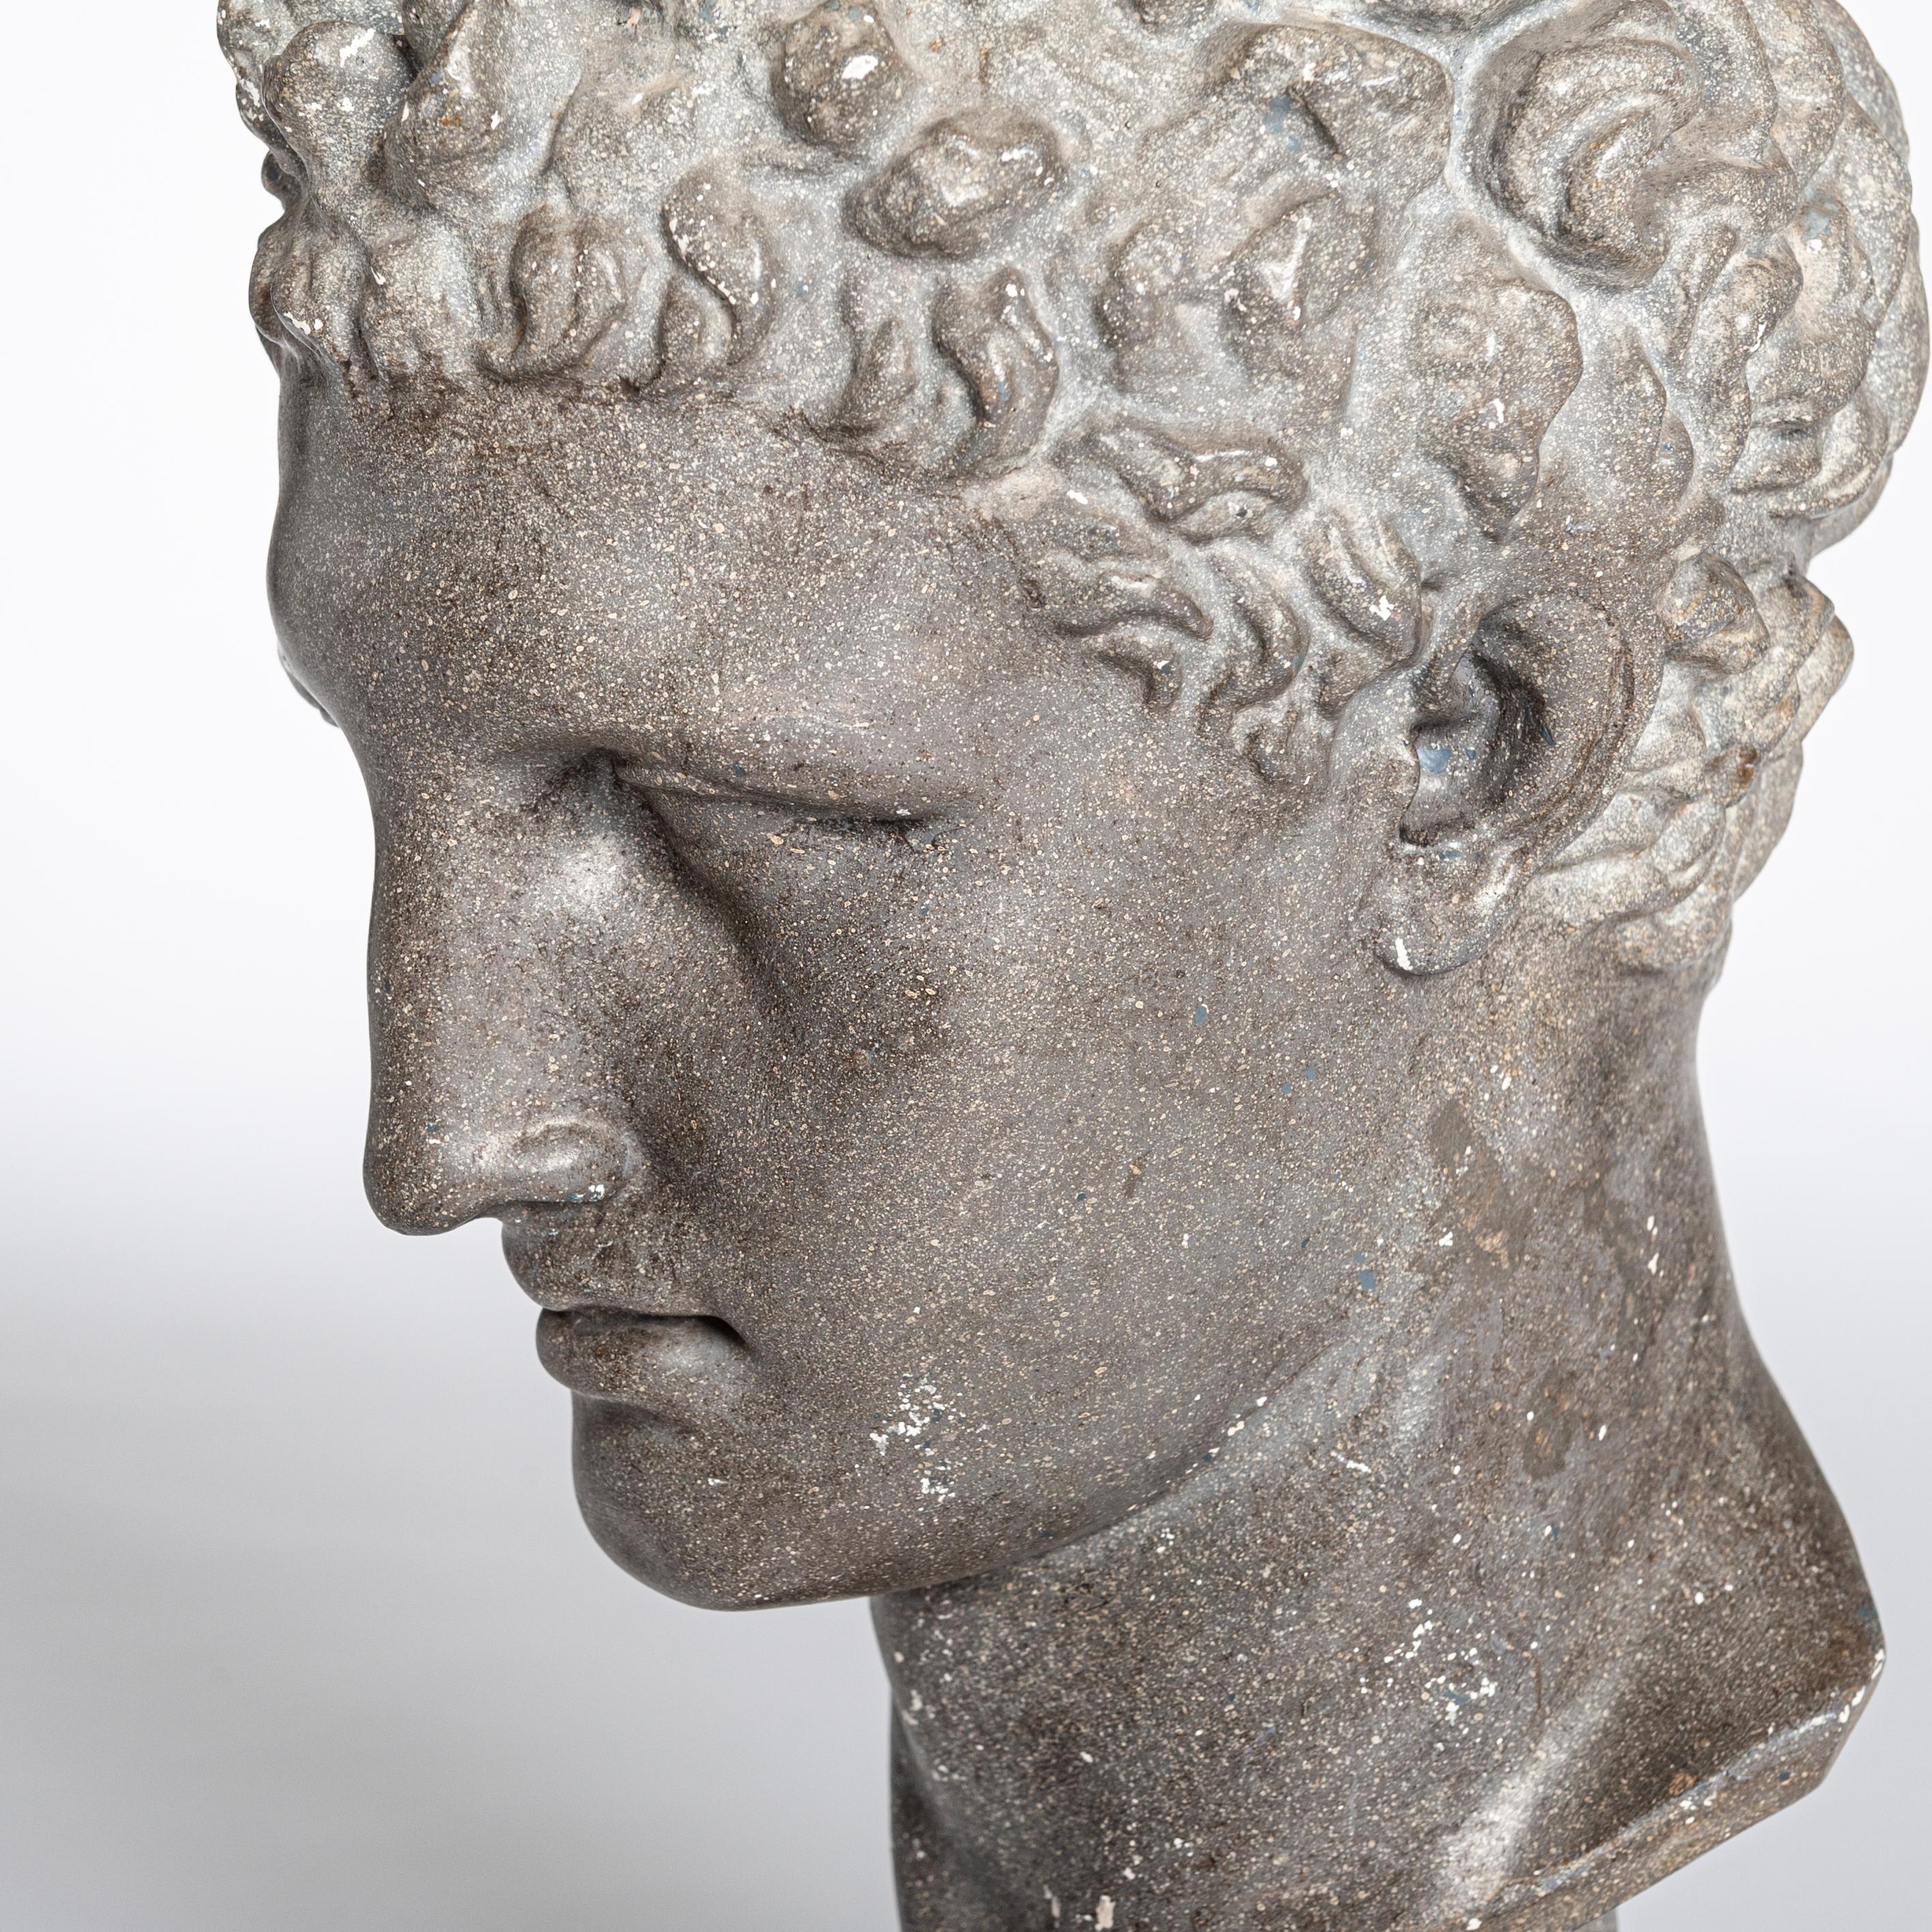 Mid-20th Century French Art Deco Sculpture/Bust of Classical Head from Antiquity, 1940s